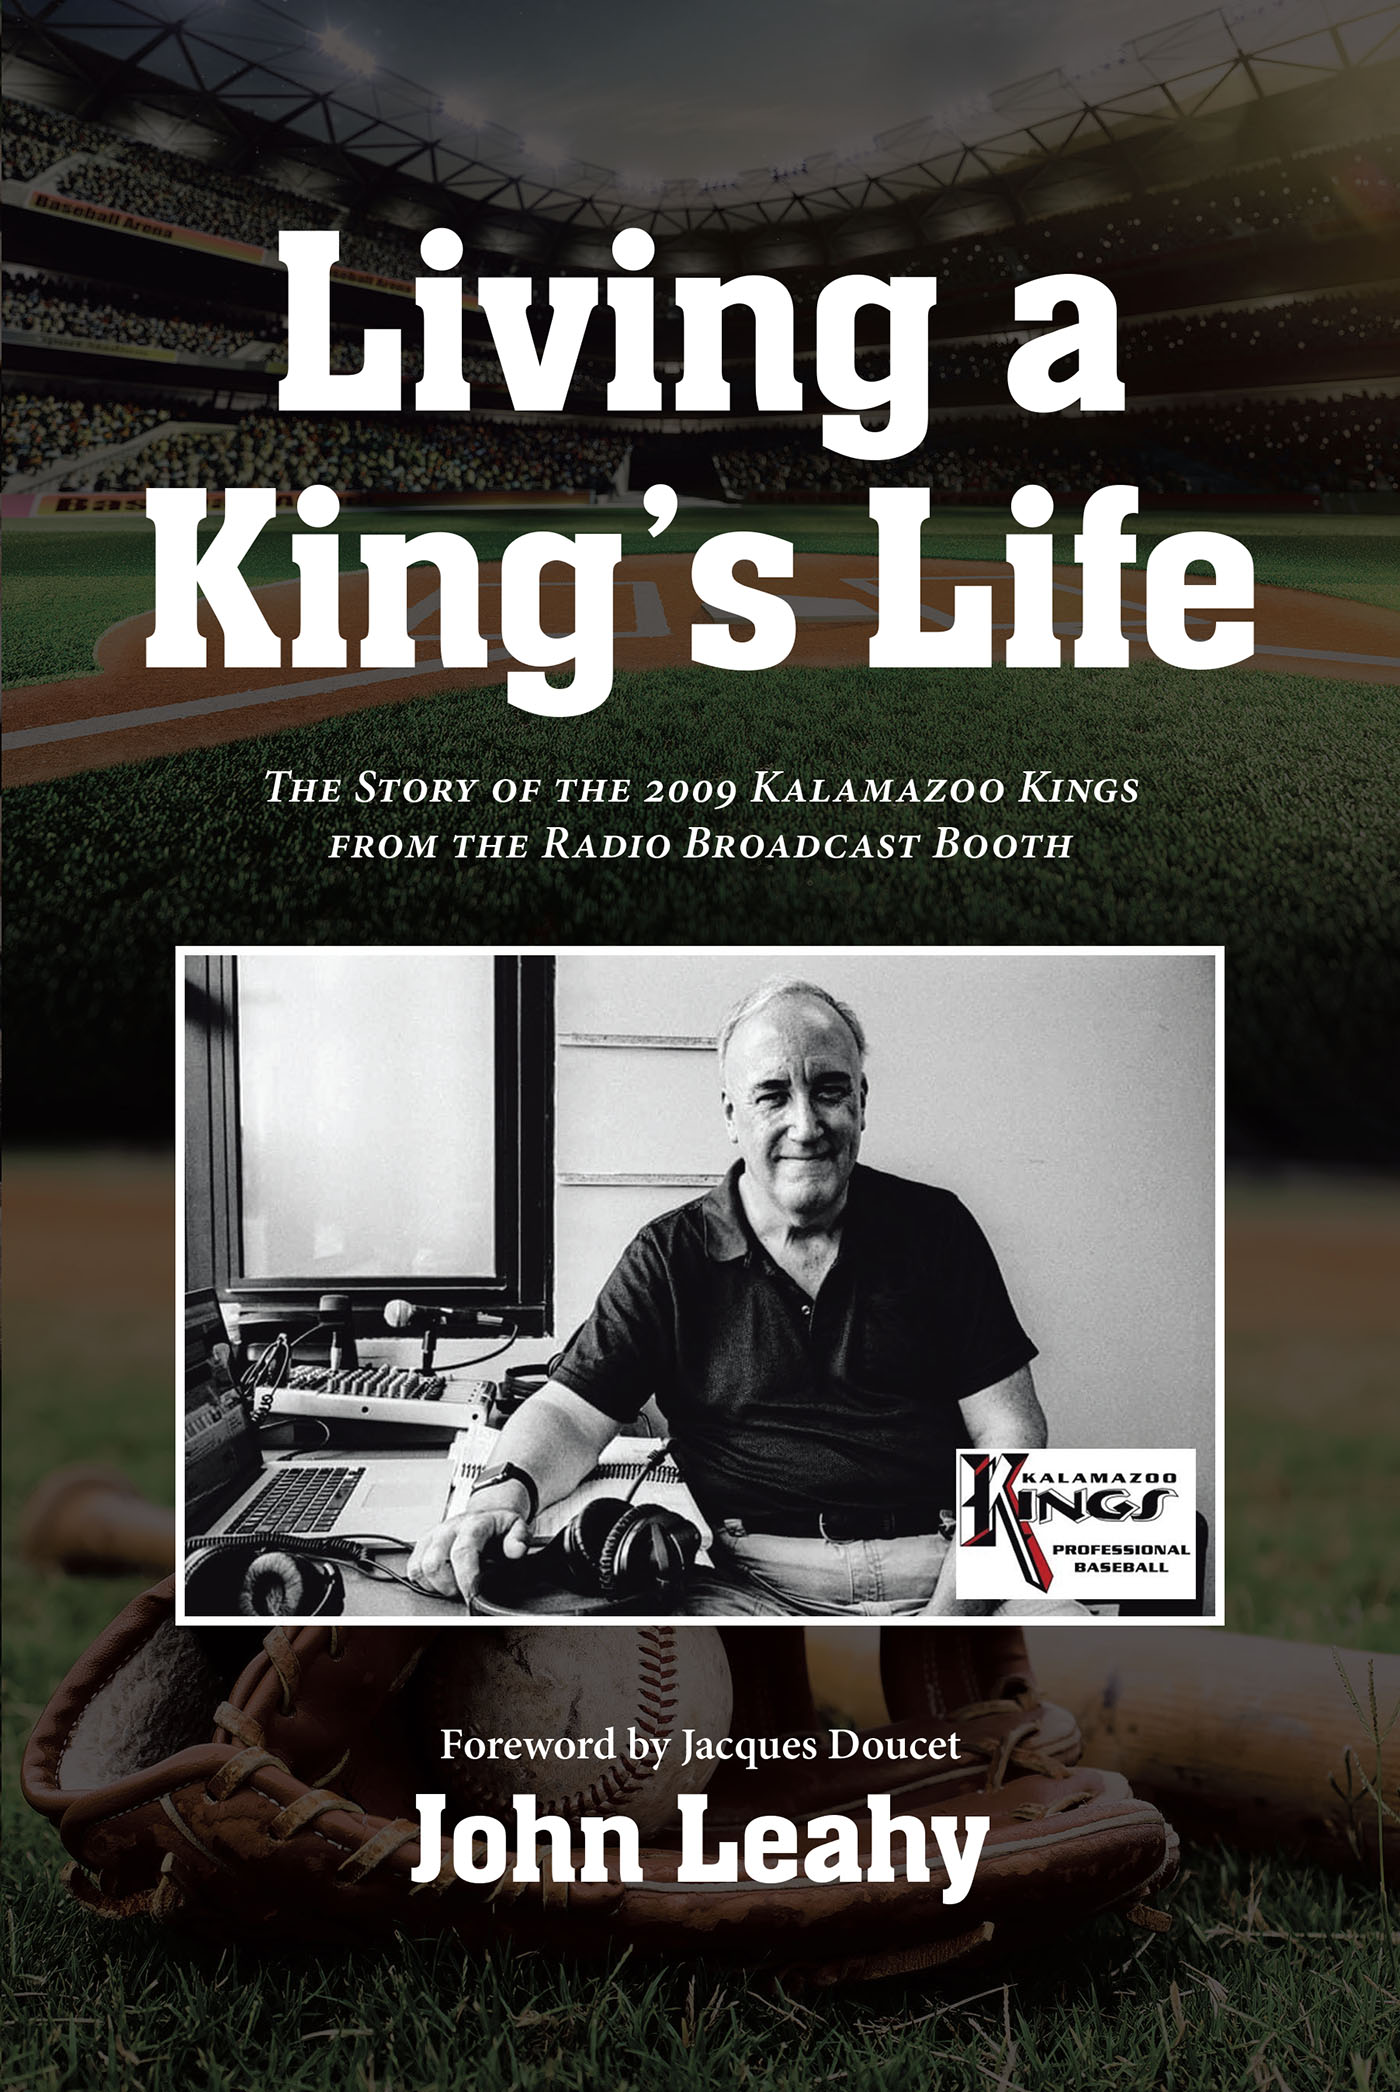 Author John Leahy’s New Book, “Living a King’s Life: The Story of the 2009 Kalamazoo Kings from the Radio Broadcast Booth,” Follows a Minor-League Baseball Team